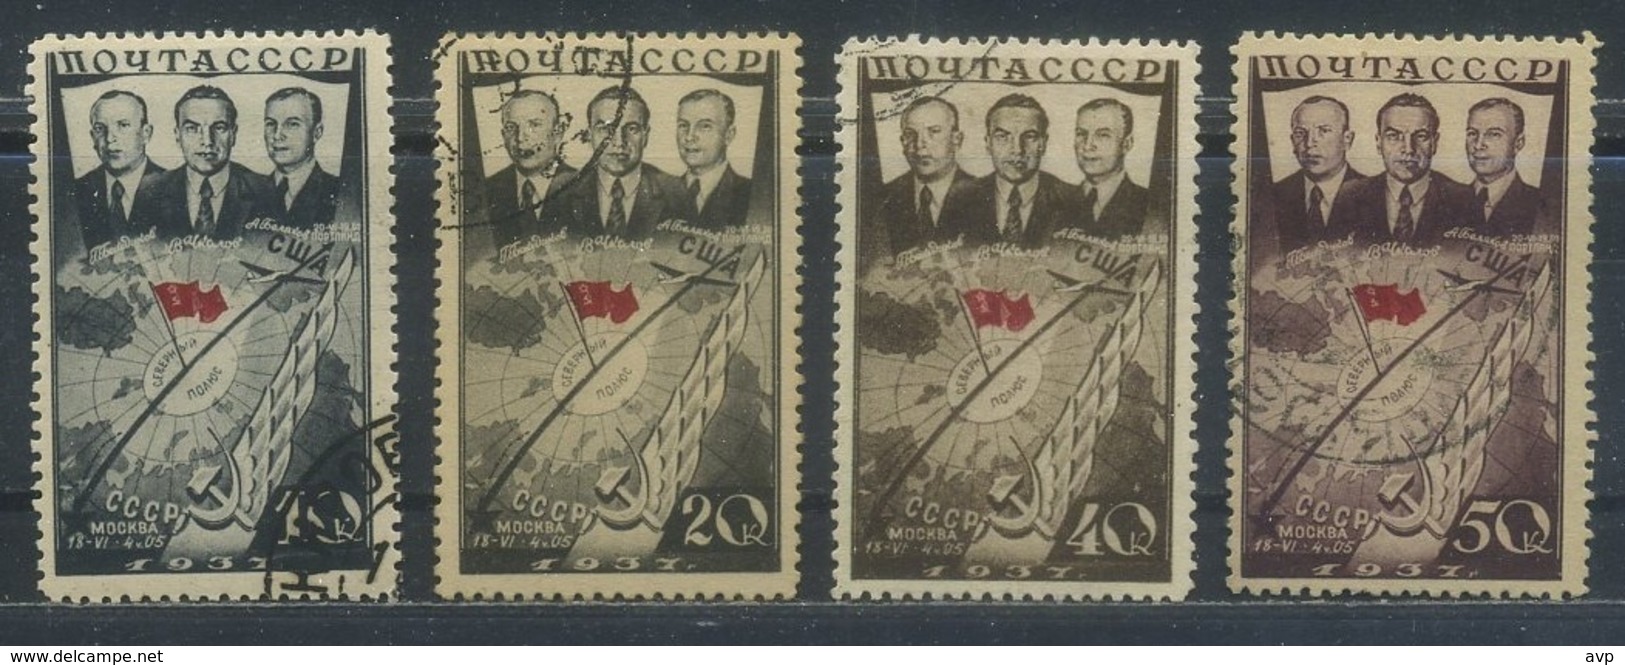 USSR 1938 Michel 595-598 First Flight Moscow-Portland Over North Pole. Used - Usados